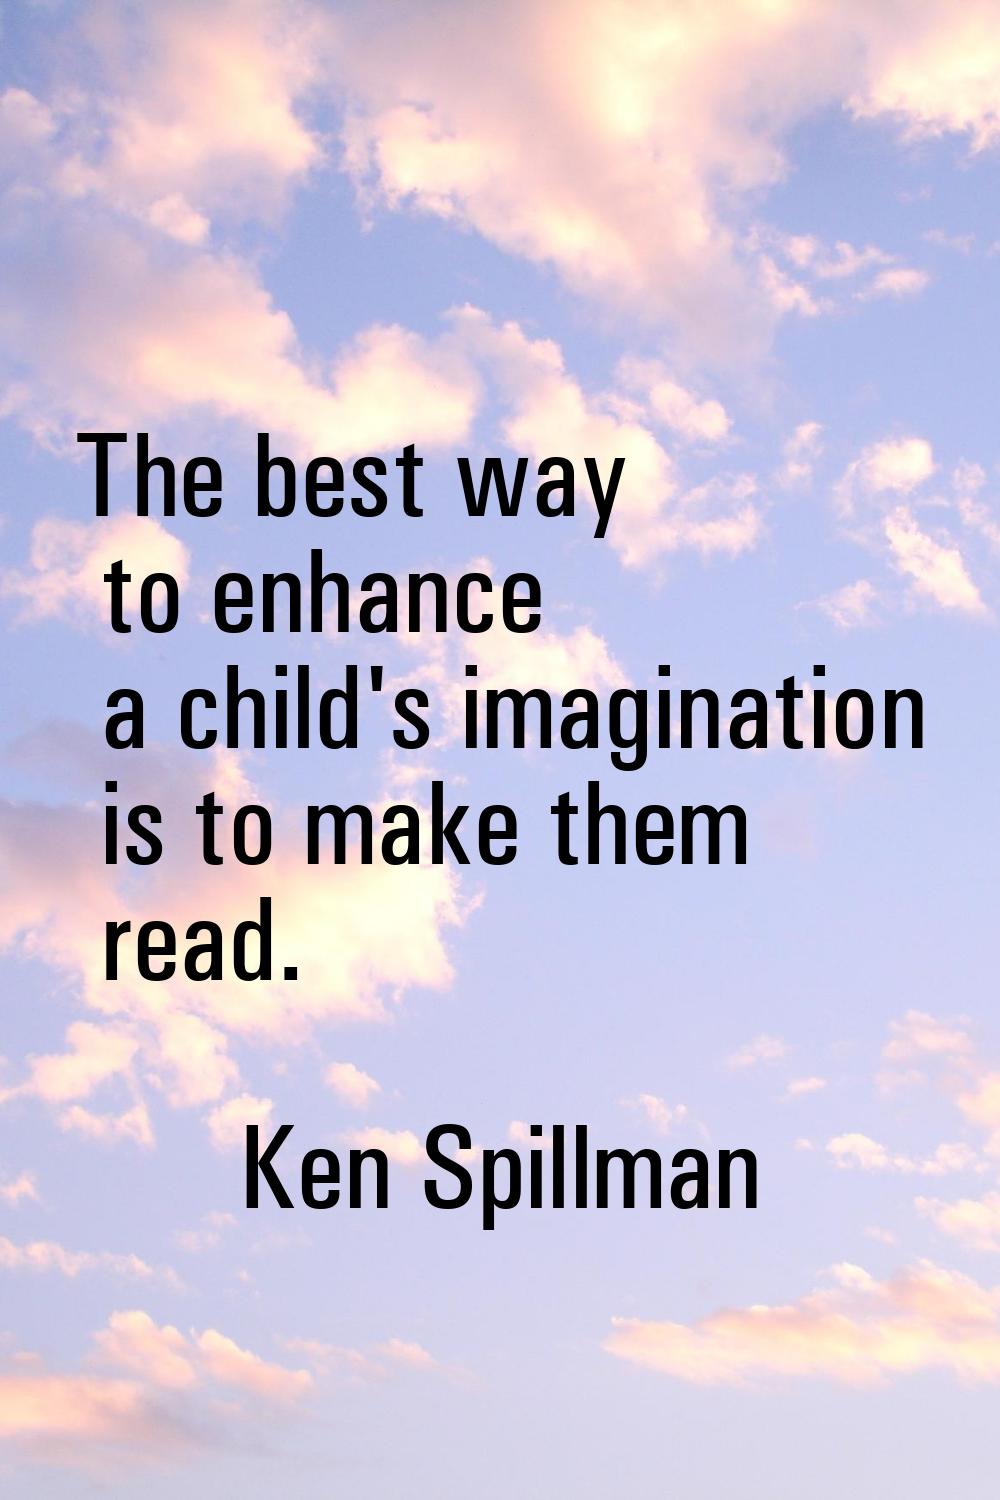 The best way to enhance a child's imagination is to make them read.